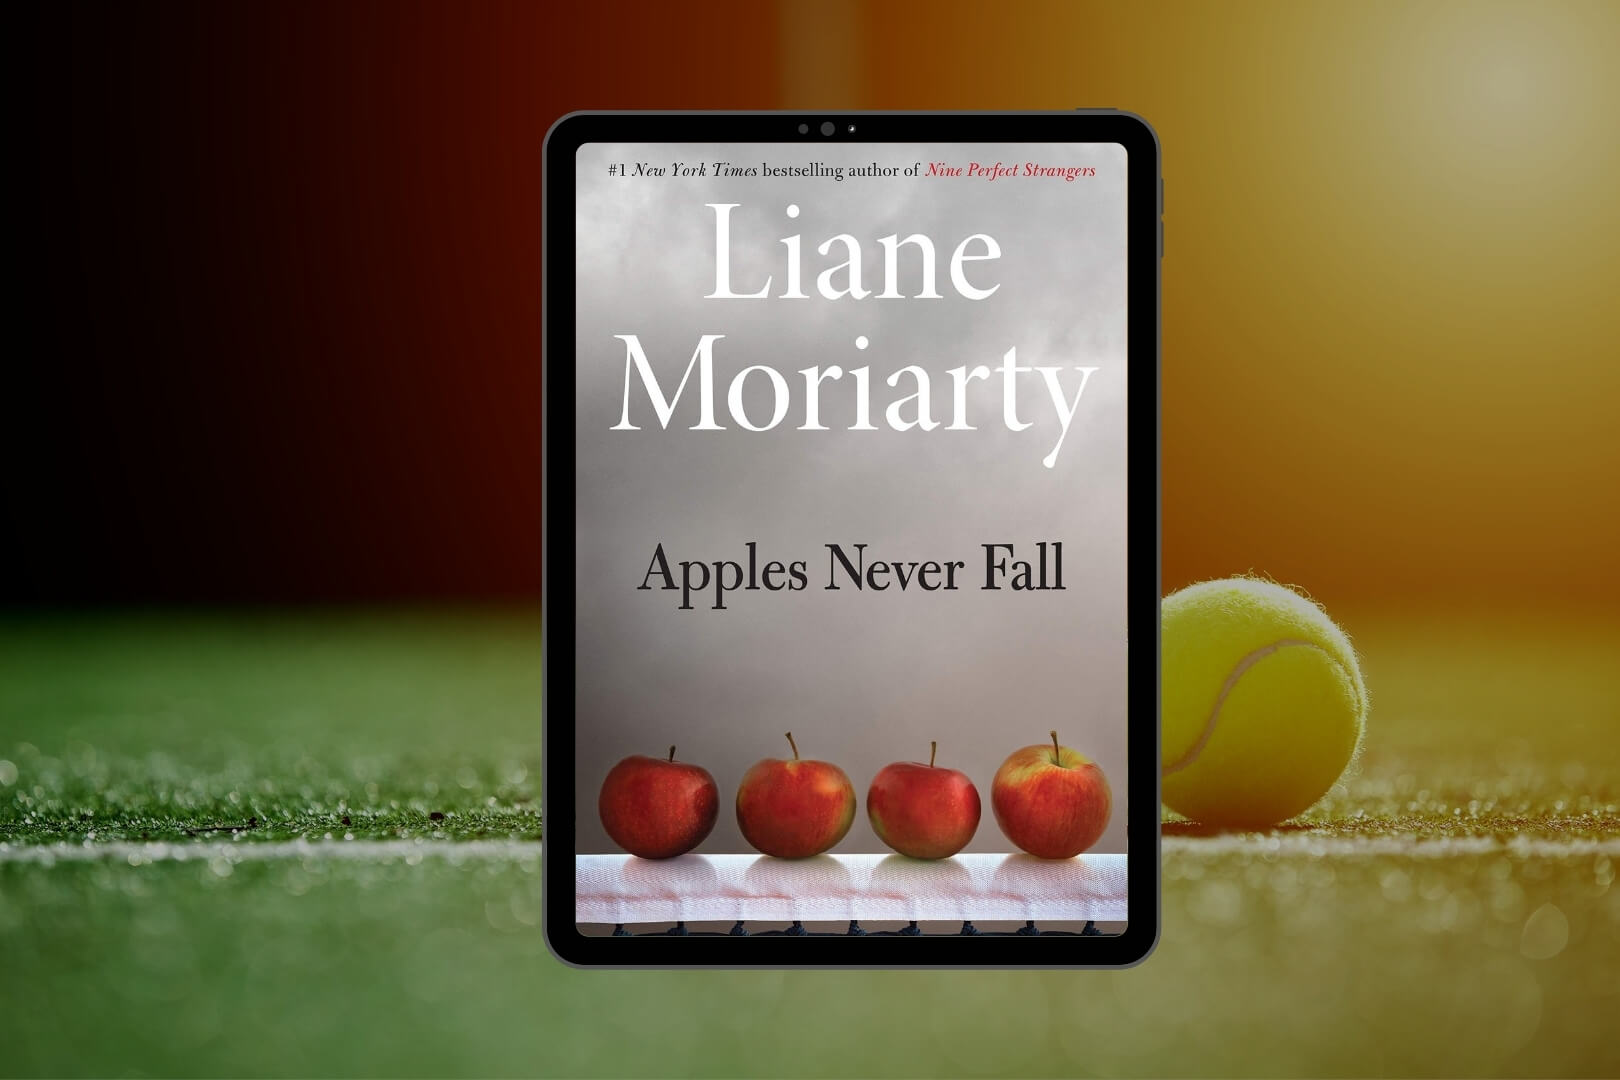 Book Club Questions for Apples Never Fall by Liane Moriarty